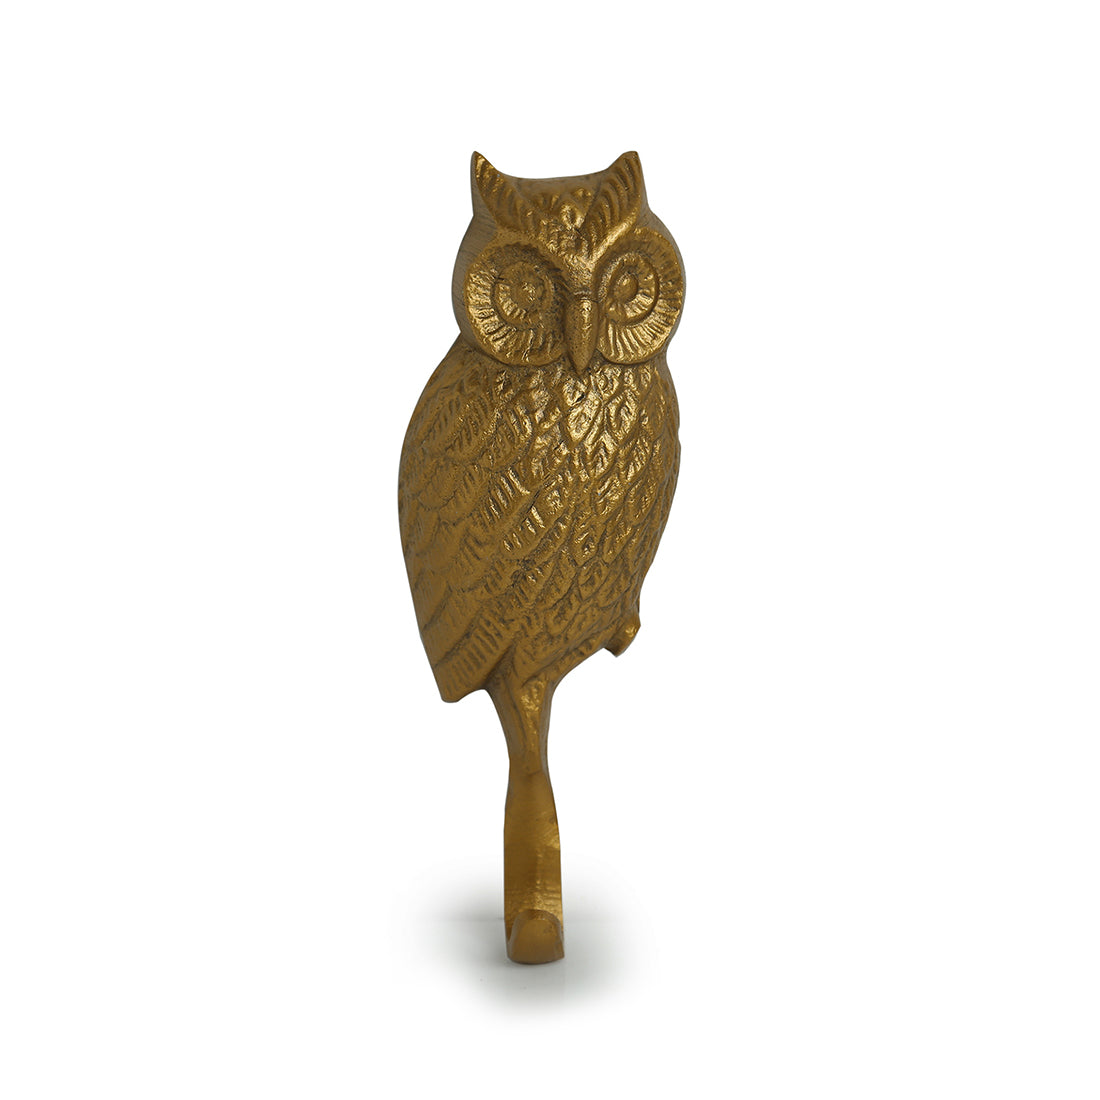 'The Ever-Wise Owl' Rustic Aluminium Wall Decor & Wall Hook (8 Inch)